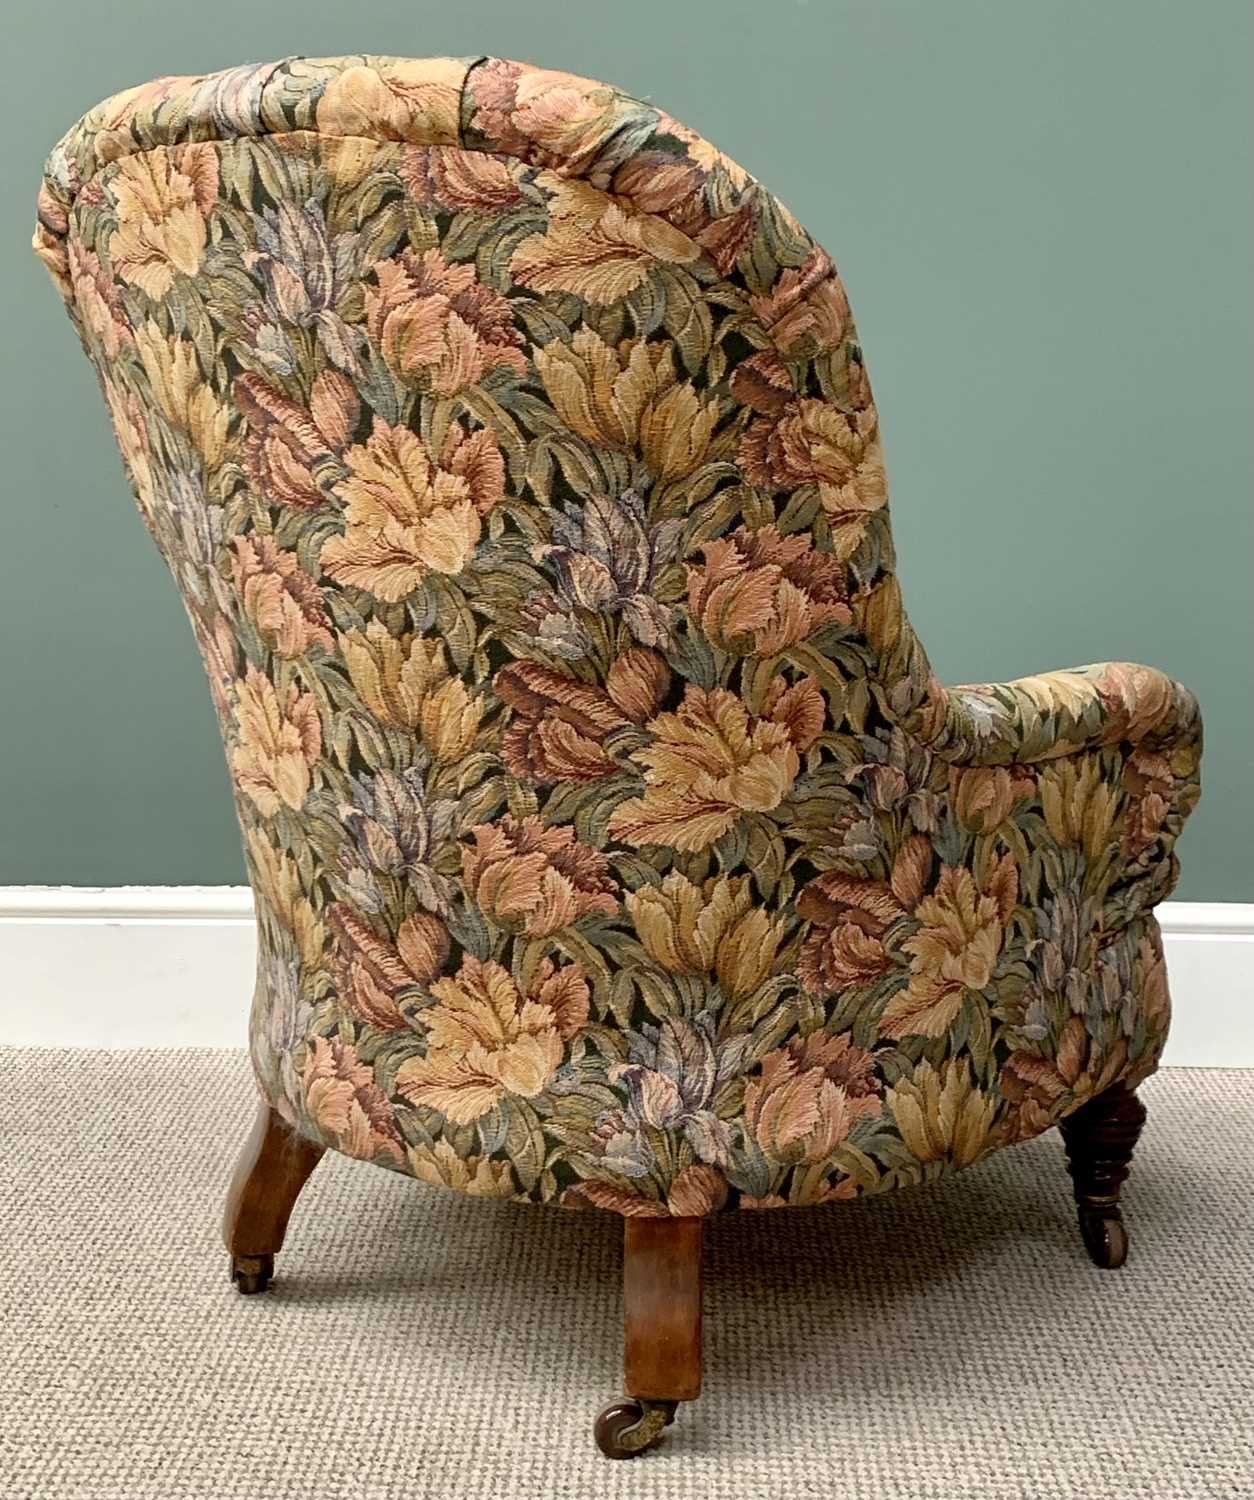 EDWARDIAN BUTTON BACK UPHOLSTERED TUB ARMCHAIR in floral upholstery, on turned front supports and - Image 3 of 3